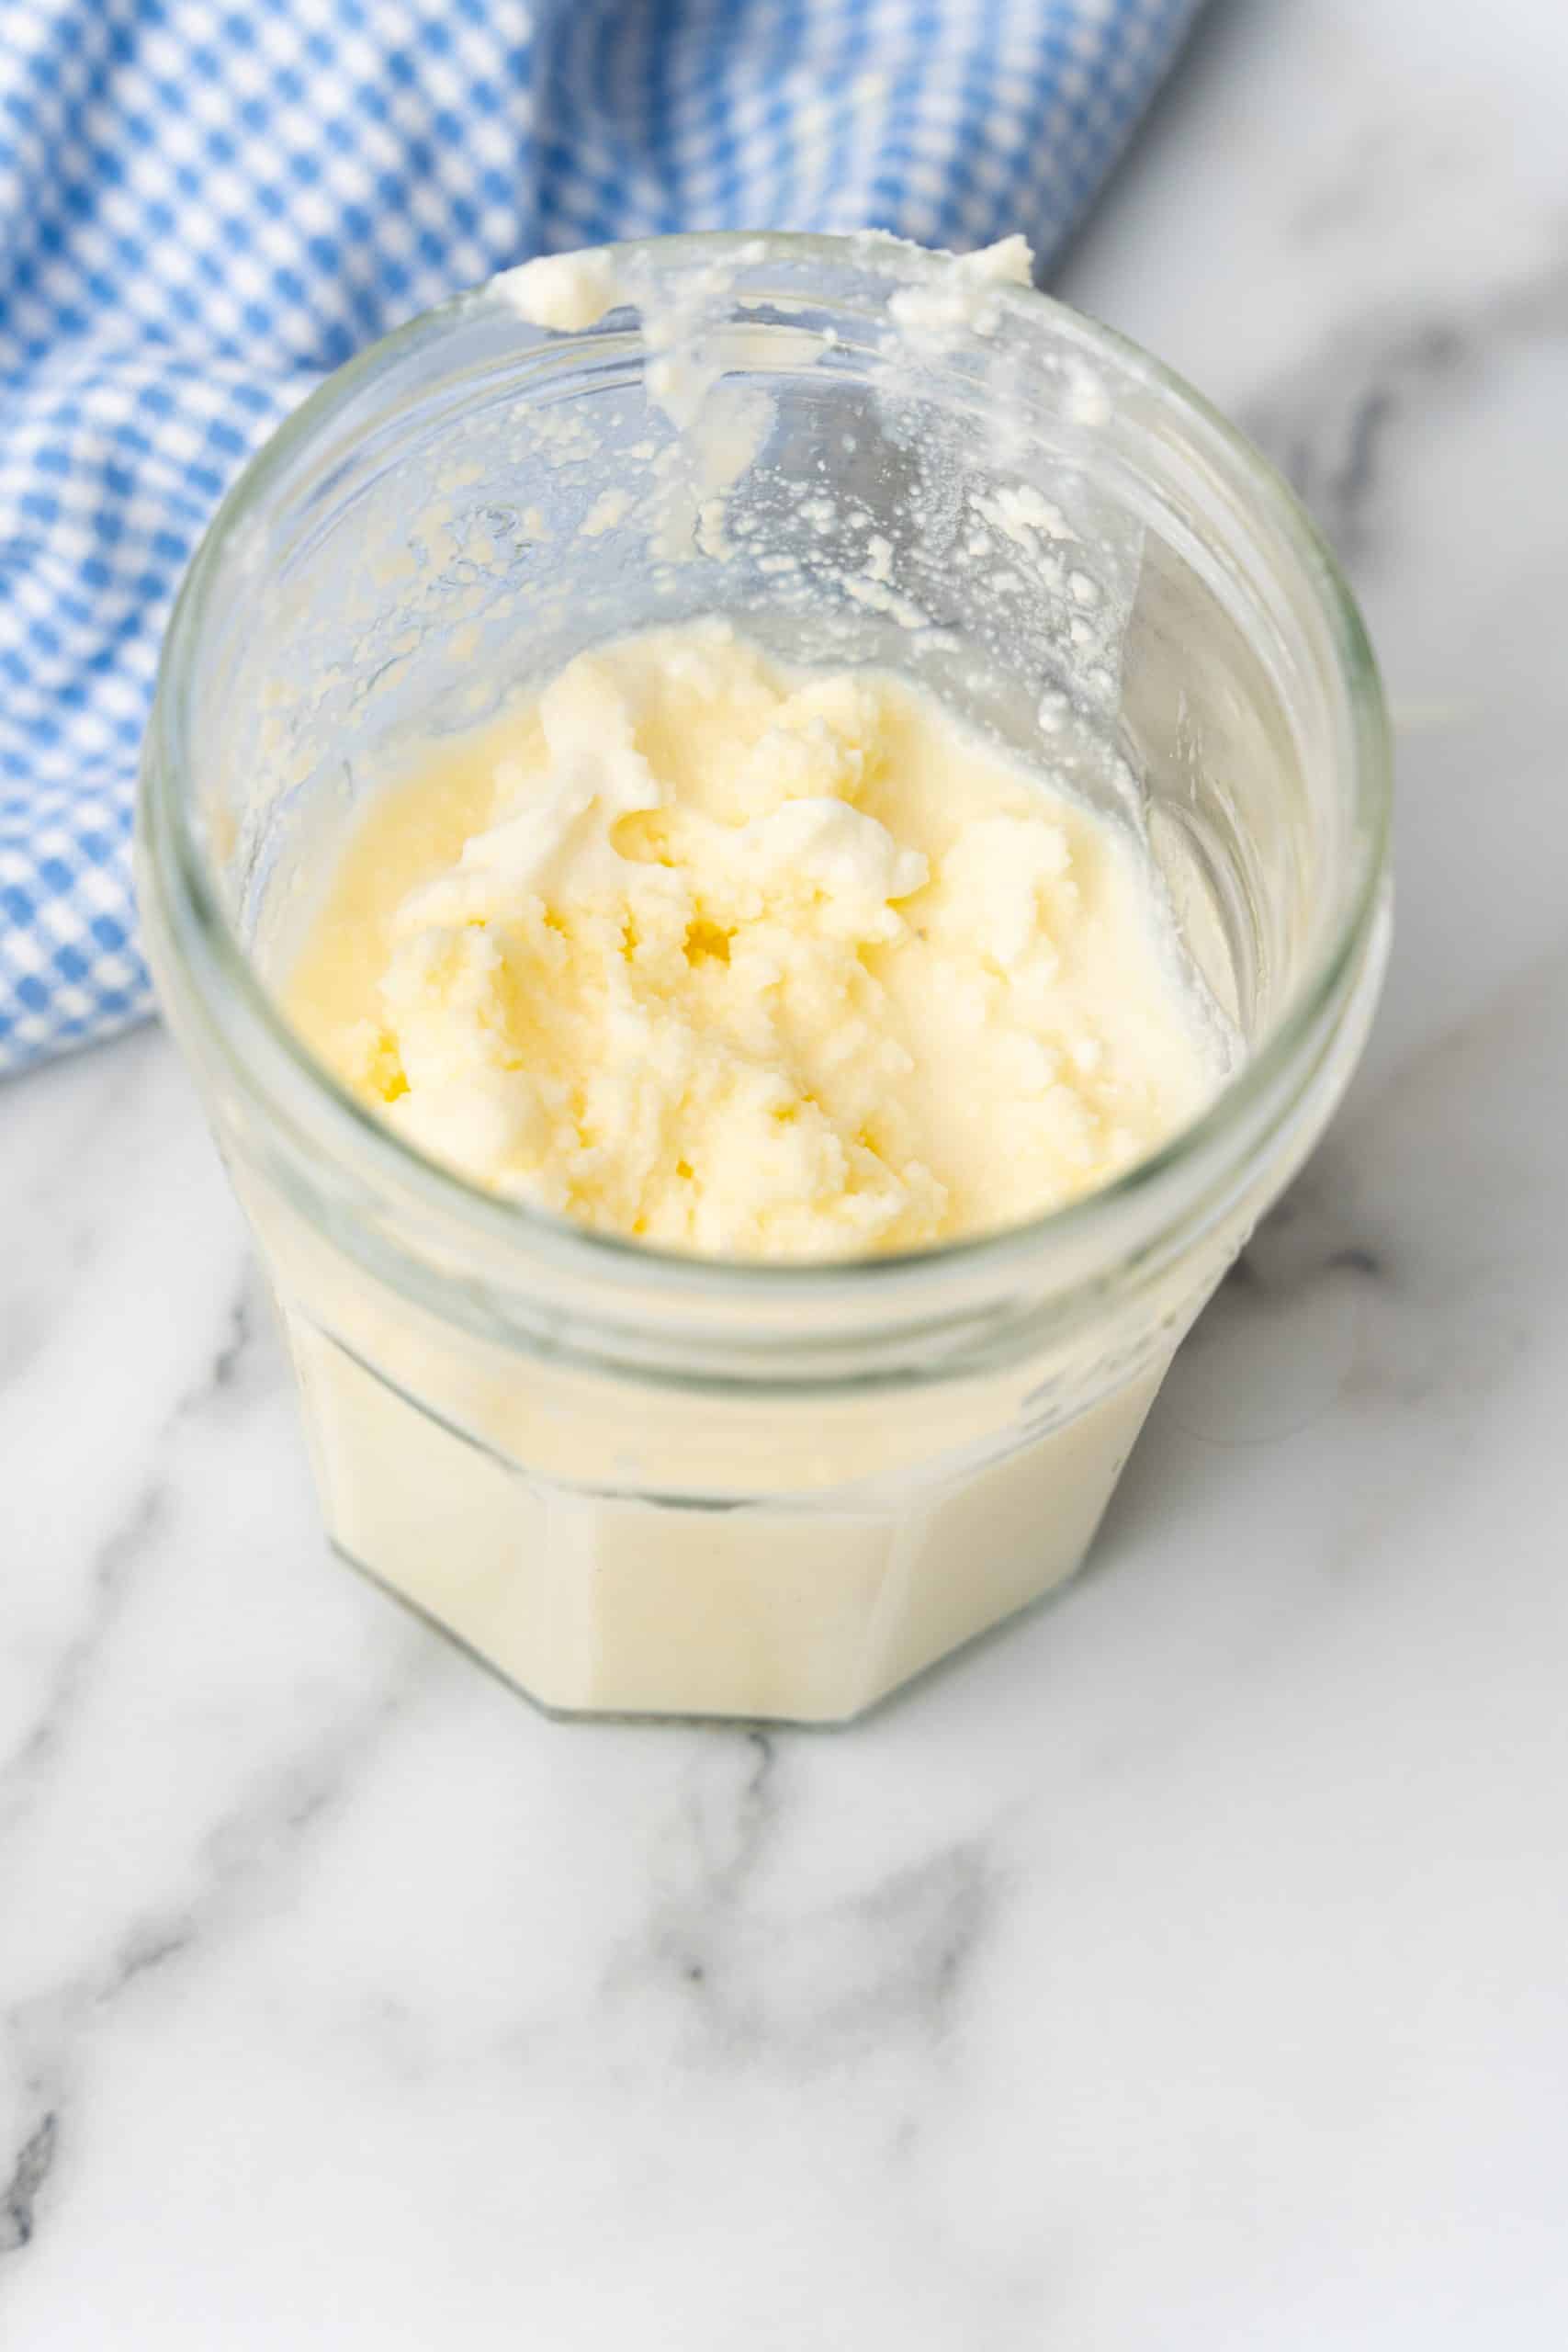 homemade butter and buttermilk in a small glass jar